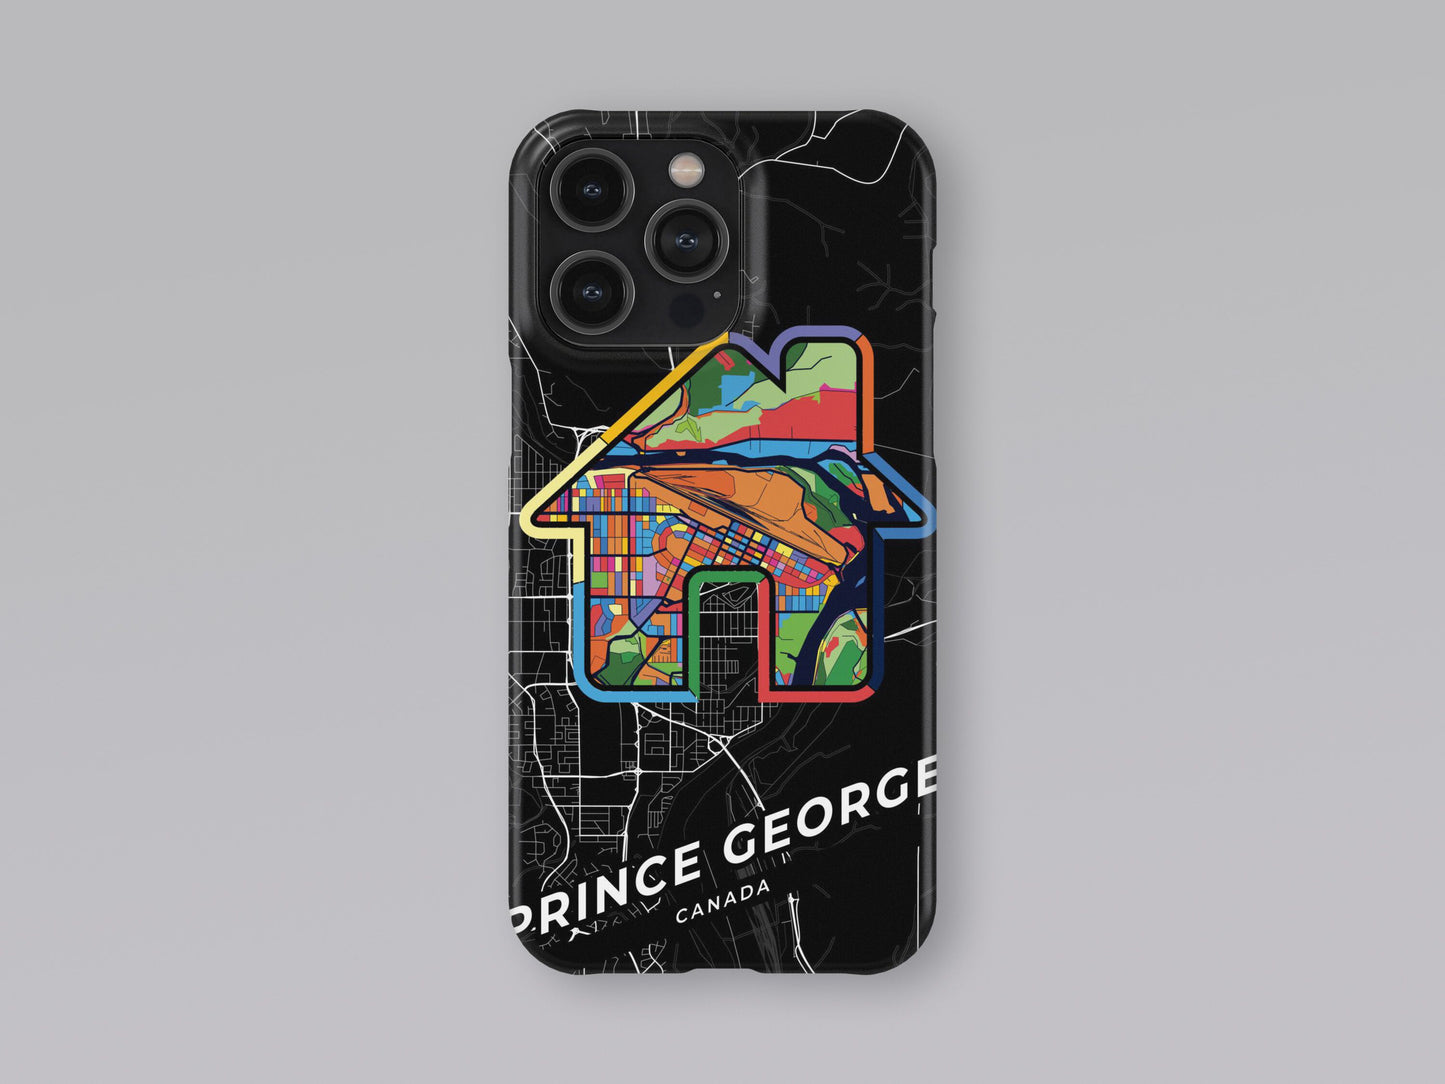 Prince George Canada slim phone case with colorful icon. Birthday, wedding or housewarming gift. Couple match cases. 3